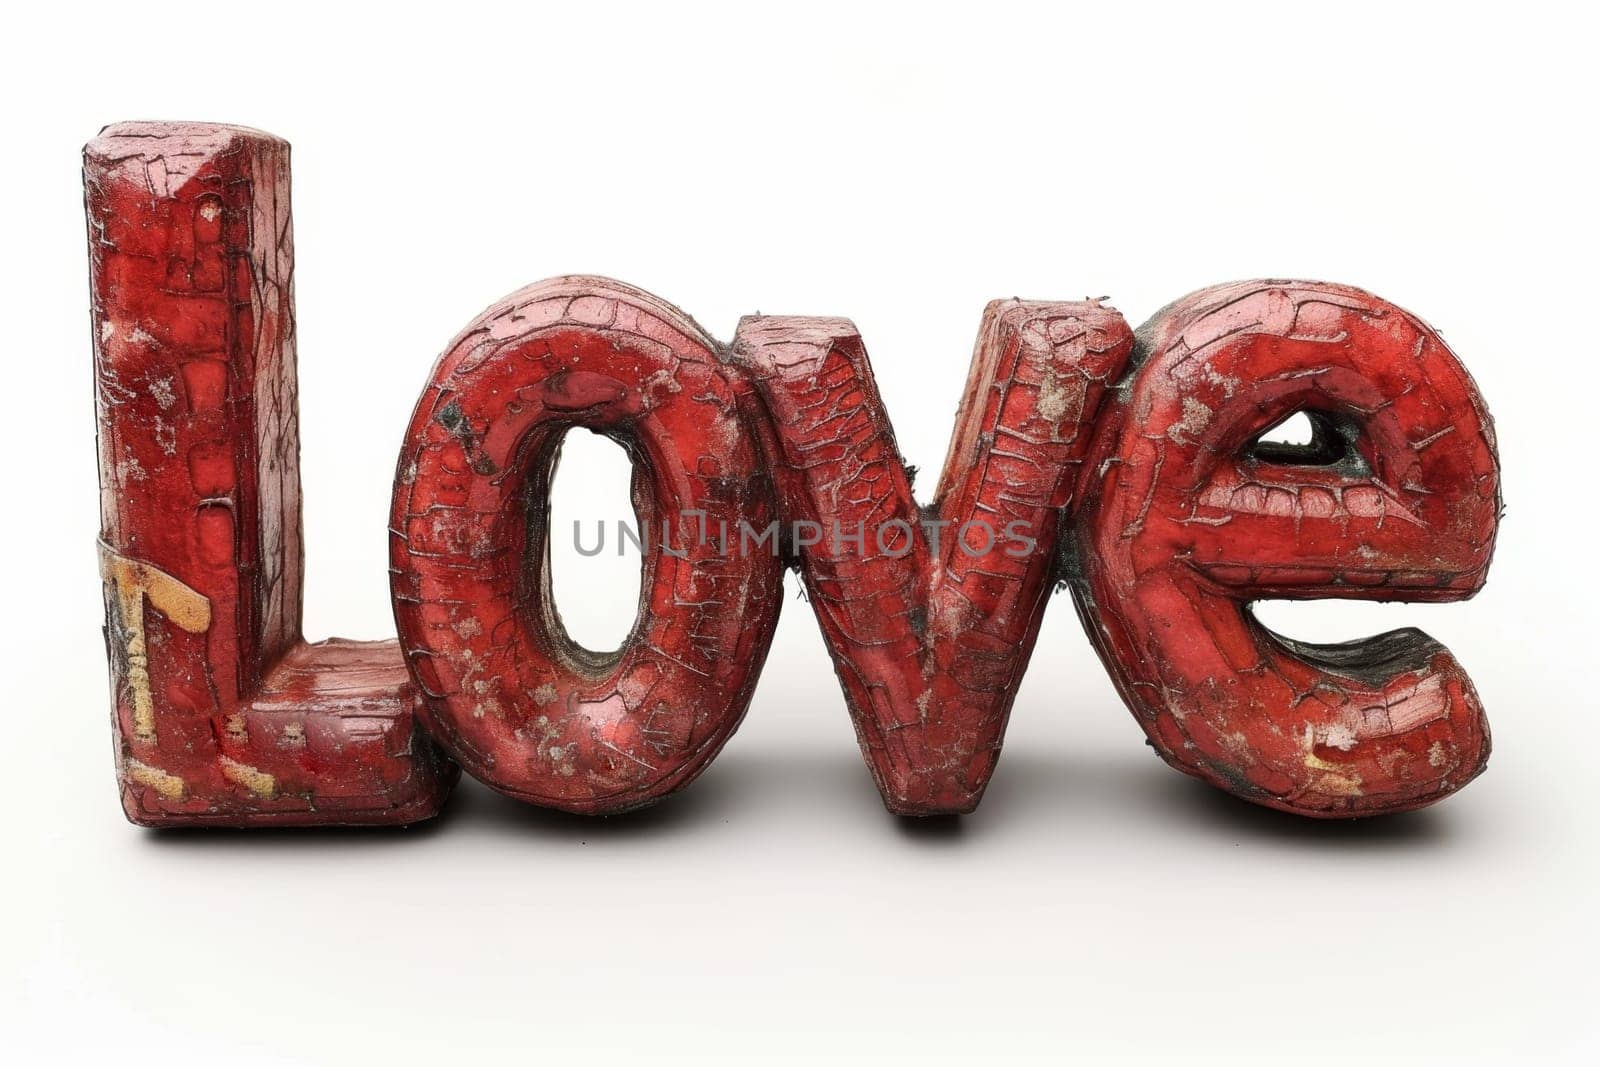 The inscription love is in red on a white background. 3d illustration.